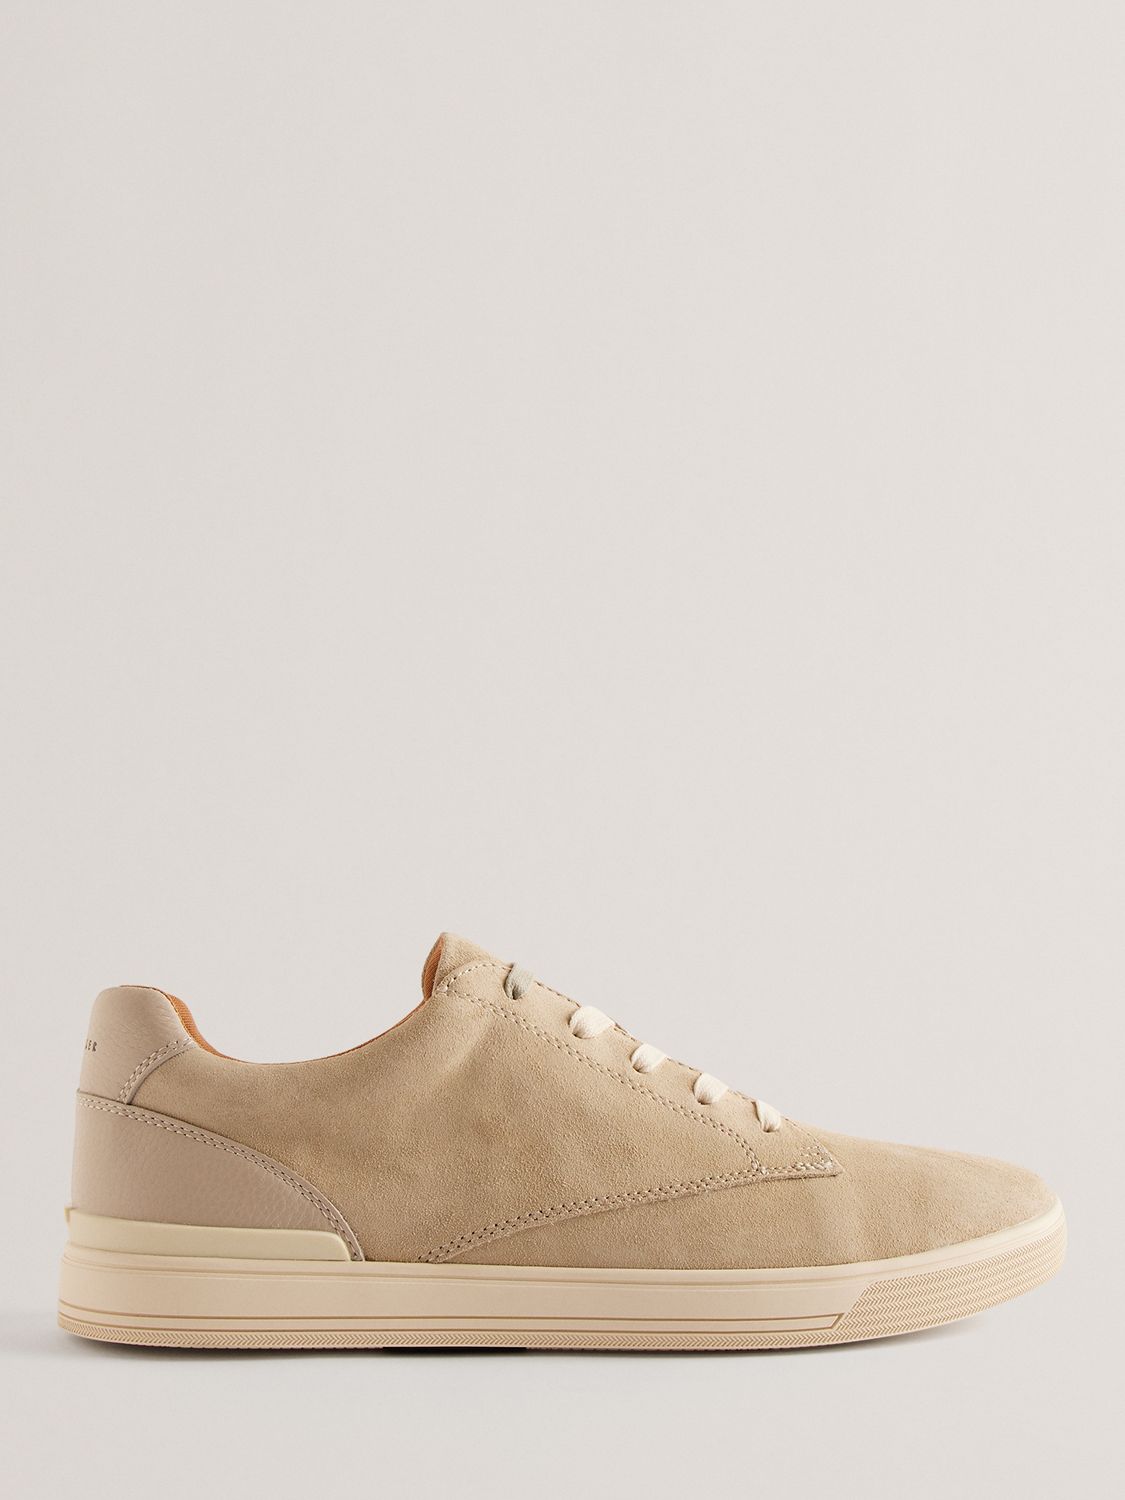 Ted Baker Brentfd Textured Leather Low Top Trainers, Beige, EU41